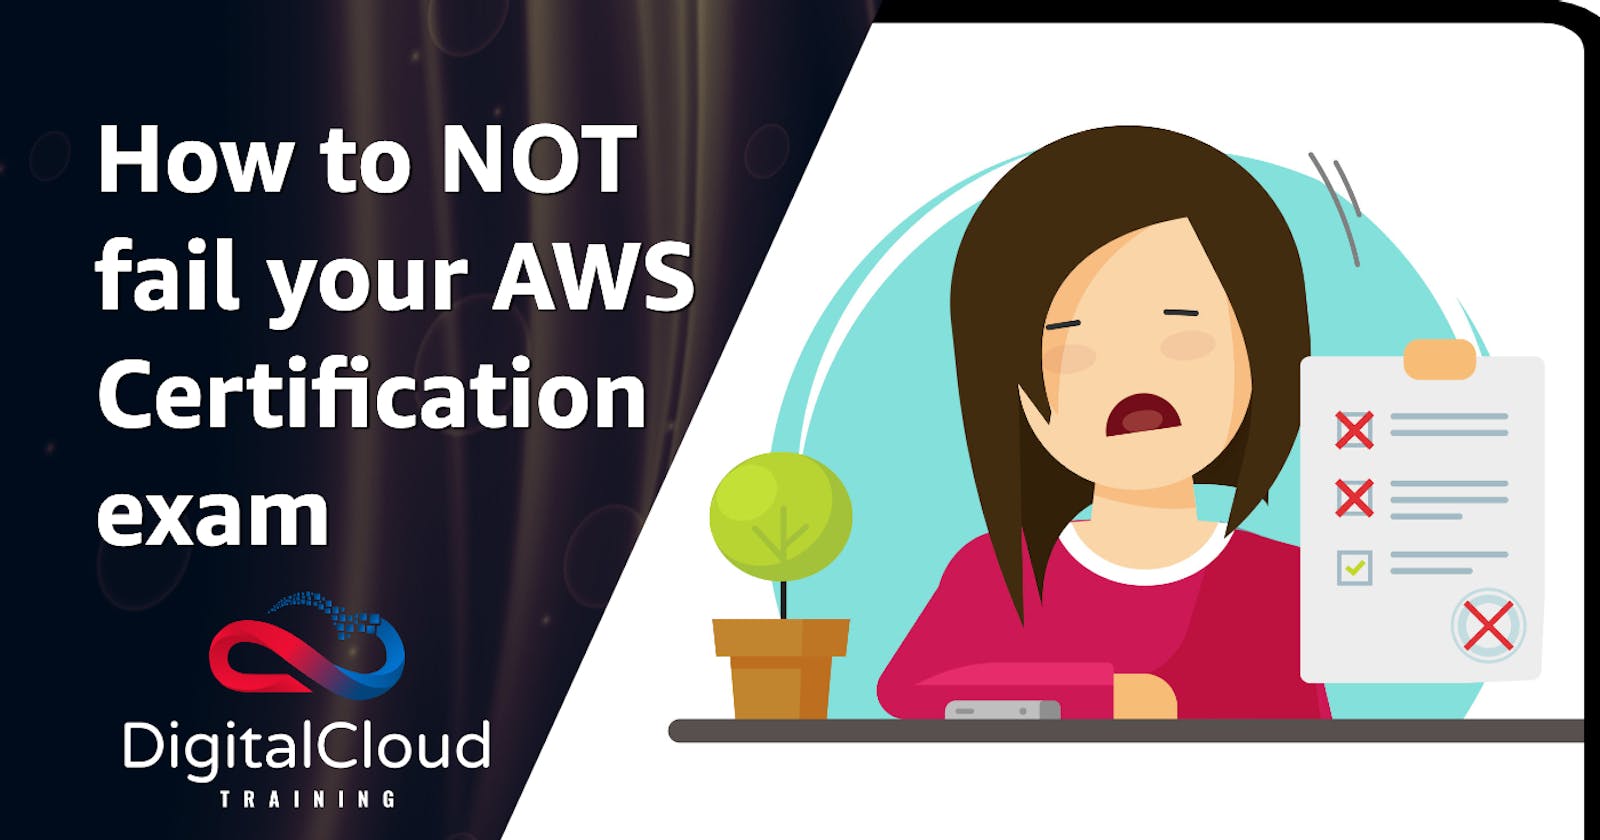 How to NOT fail your AWS Certification exam